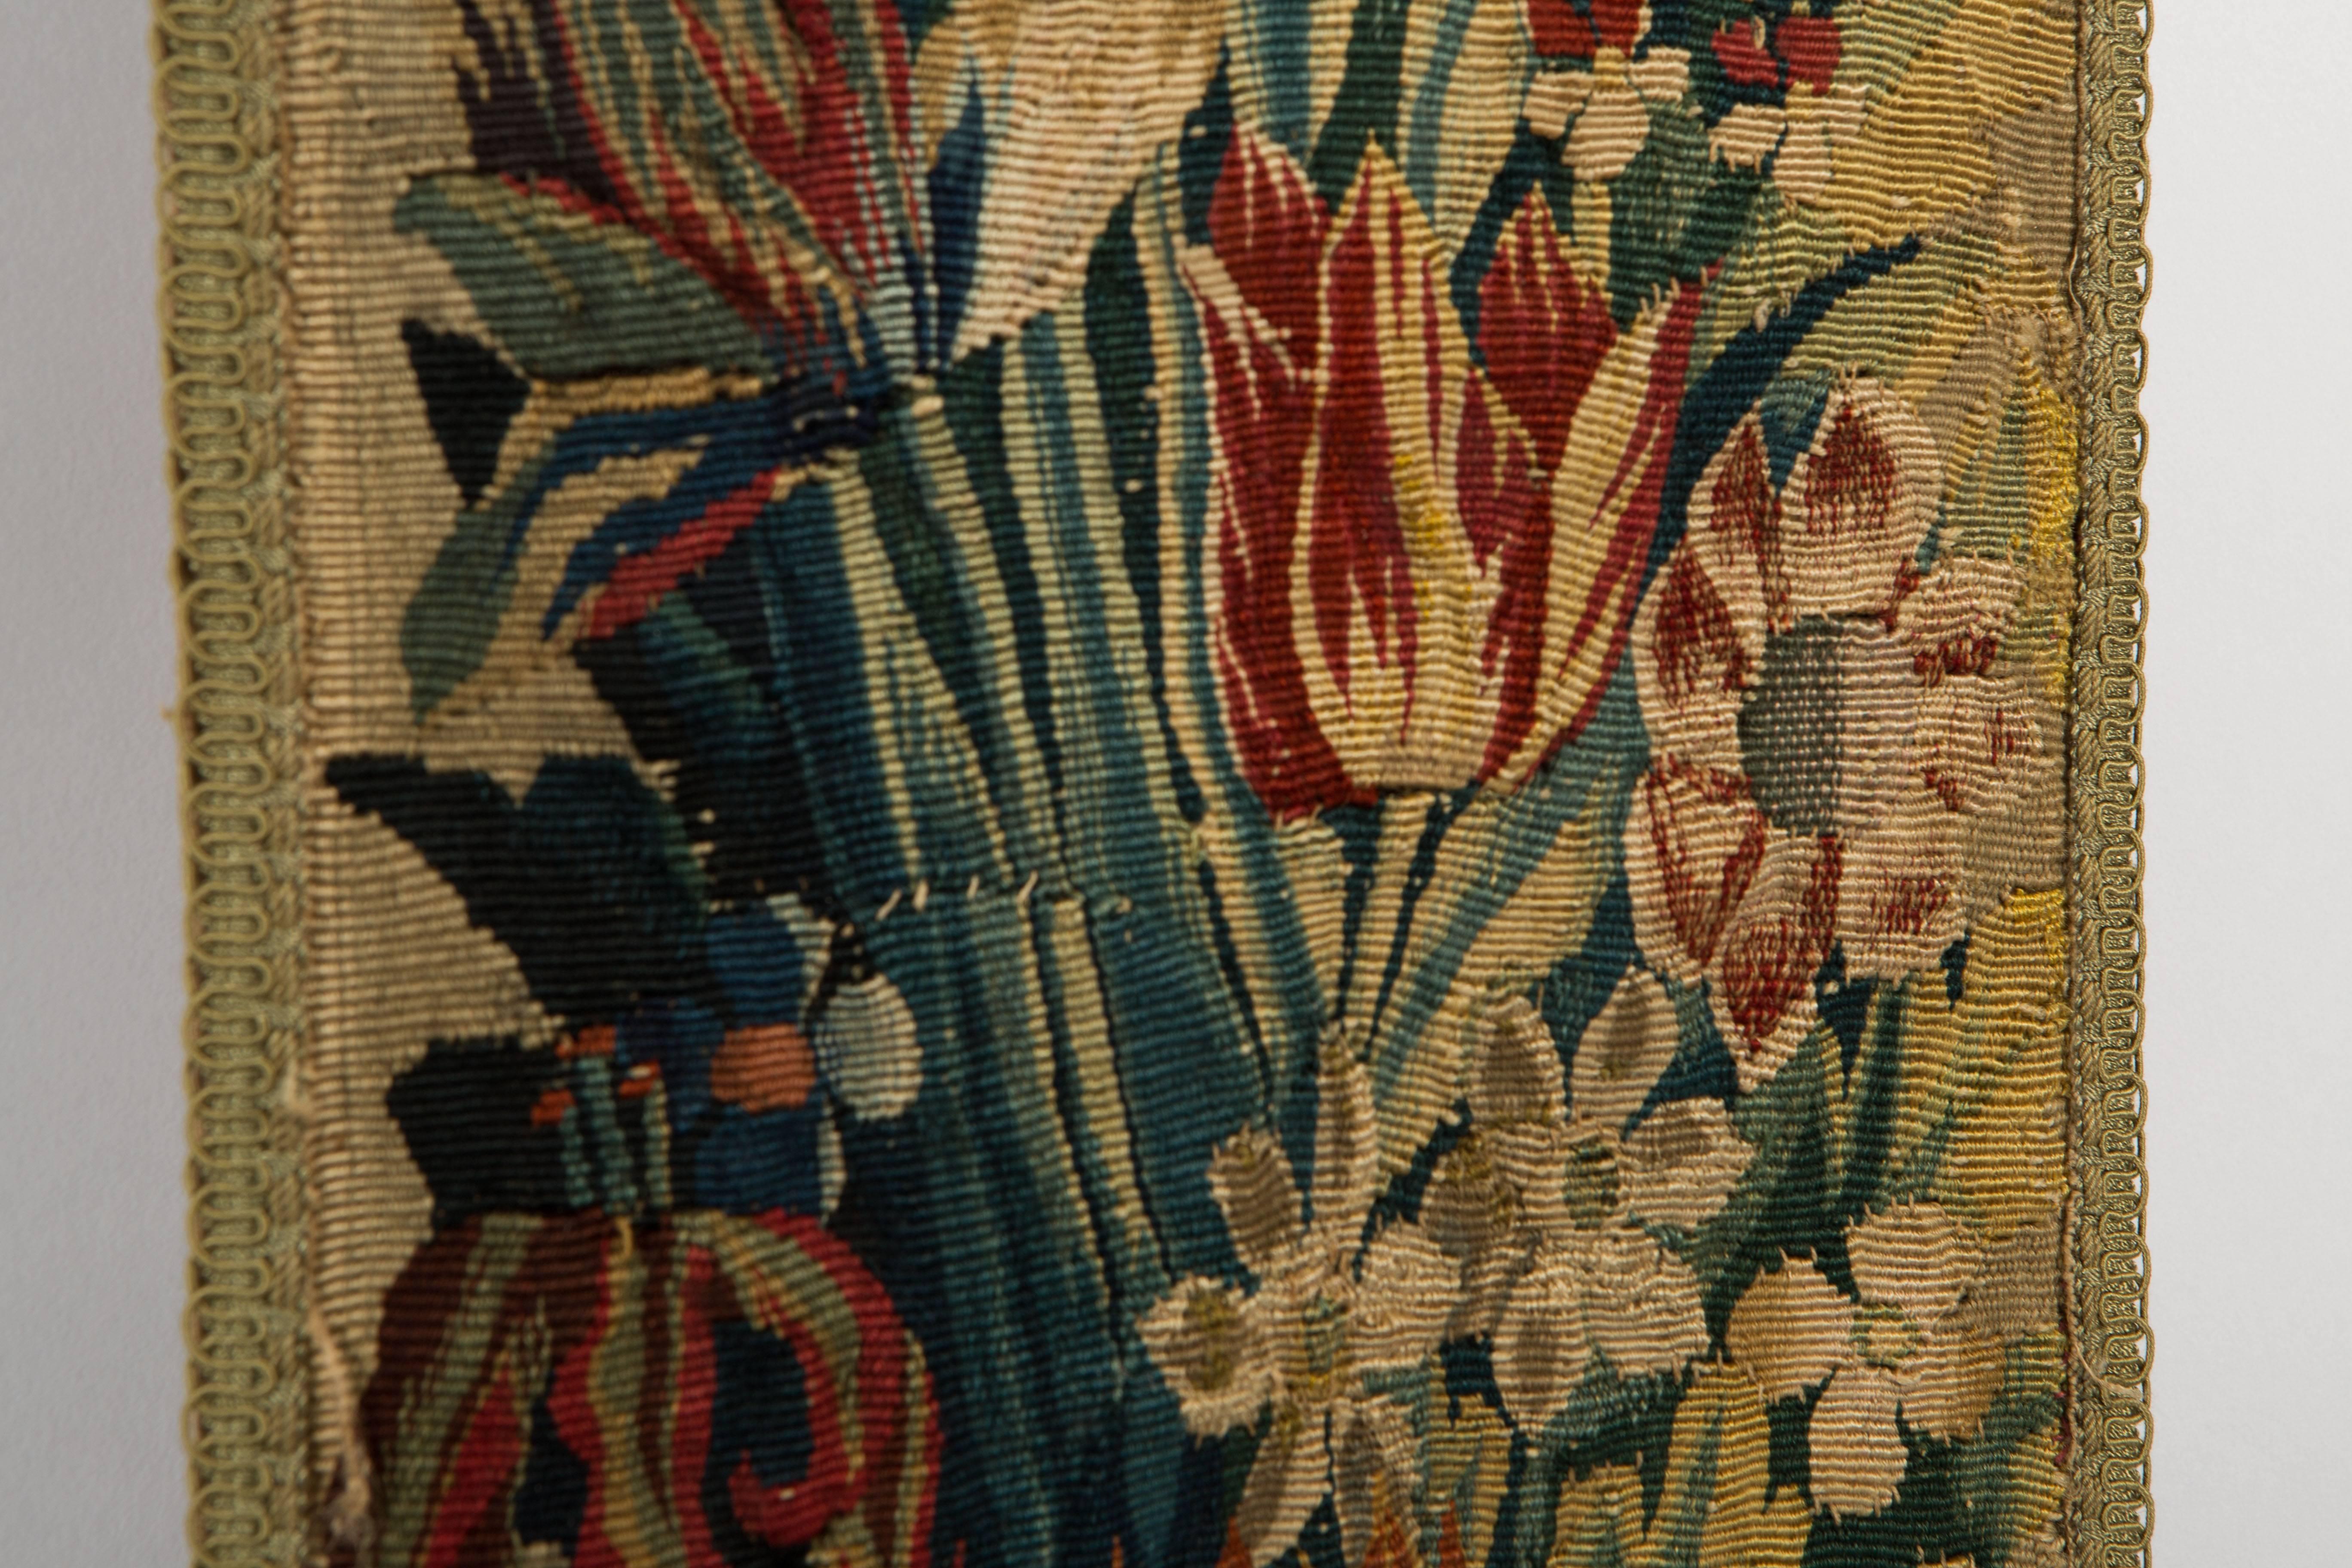 Late 17th century Flemish floral tapestry in blues and reds. The pattern consist of tulips and various other flowers. The design is very typical Flemish.